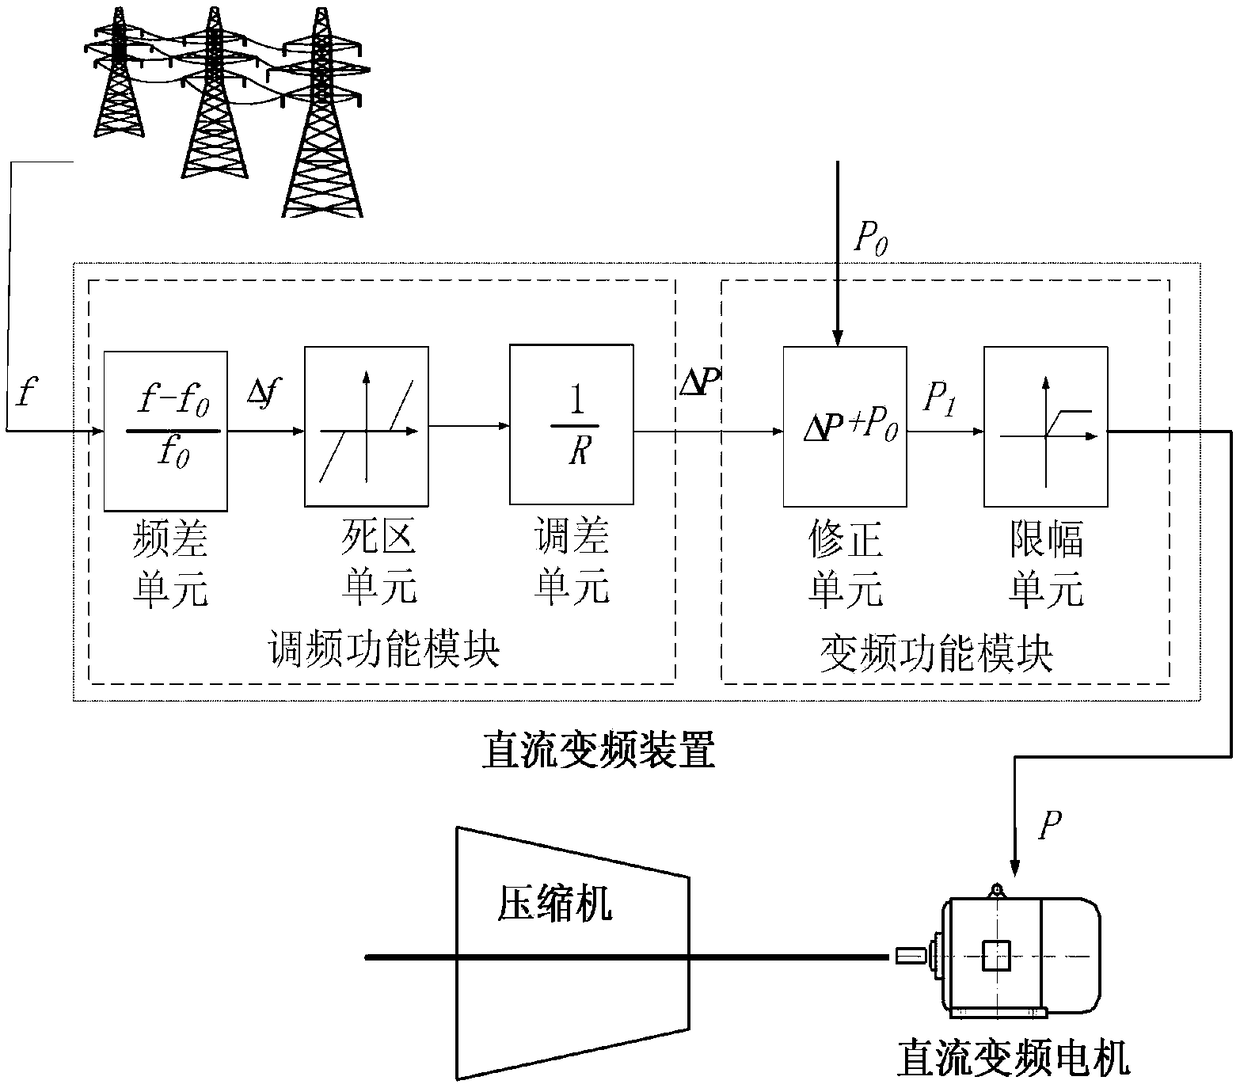 A method of compressed air energy storage system responding to power grid frequency modulation